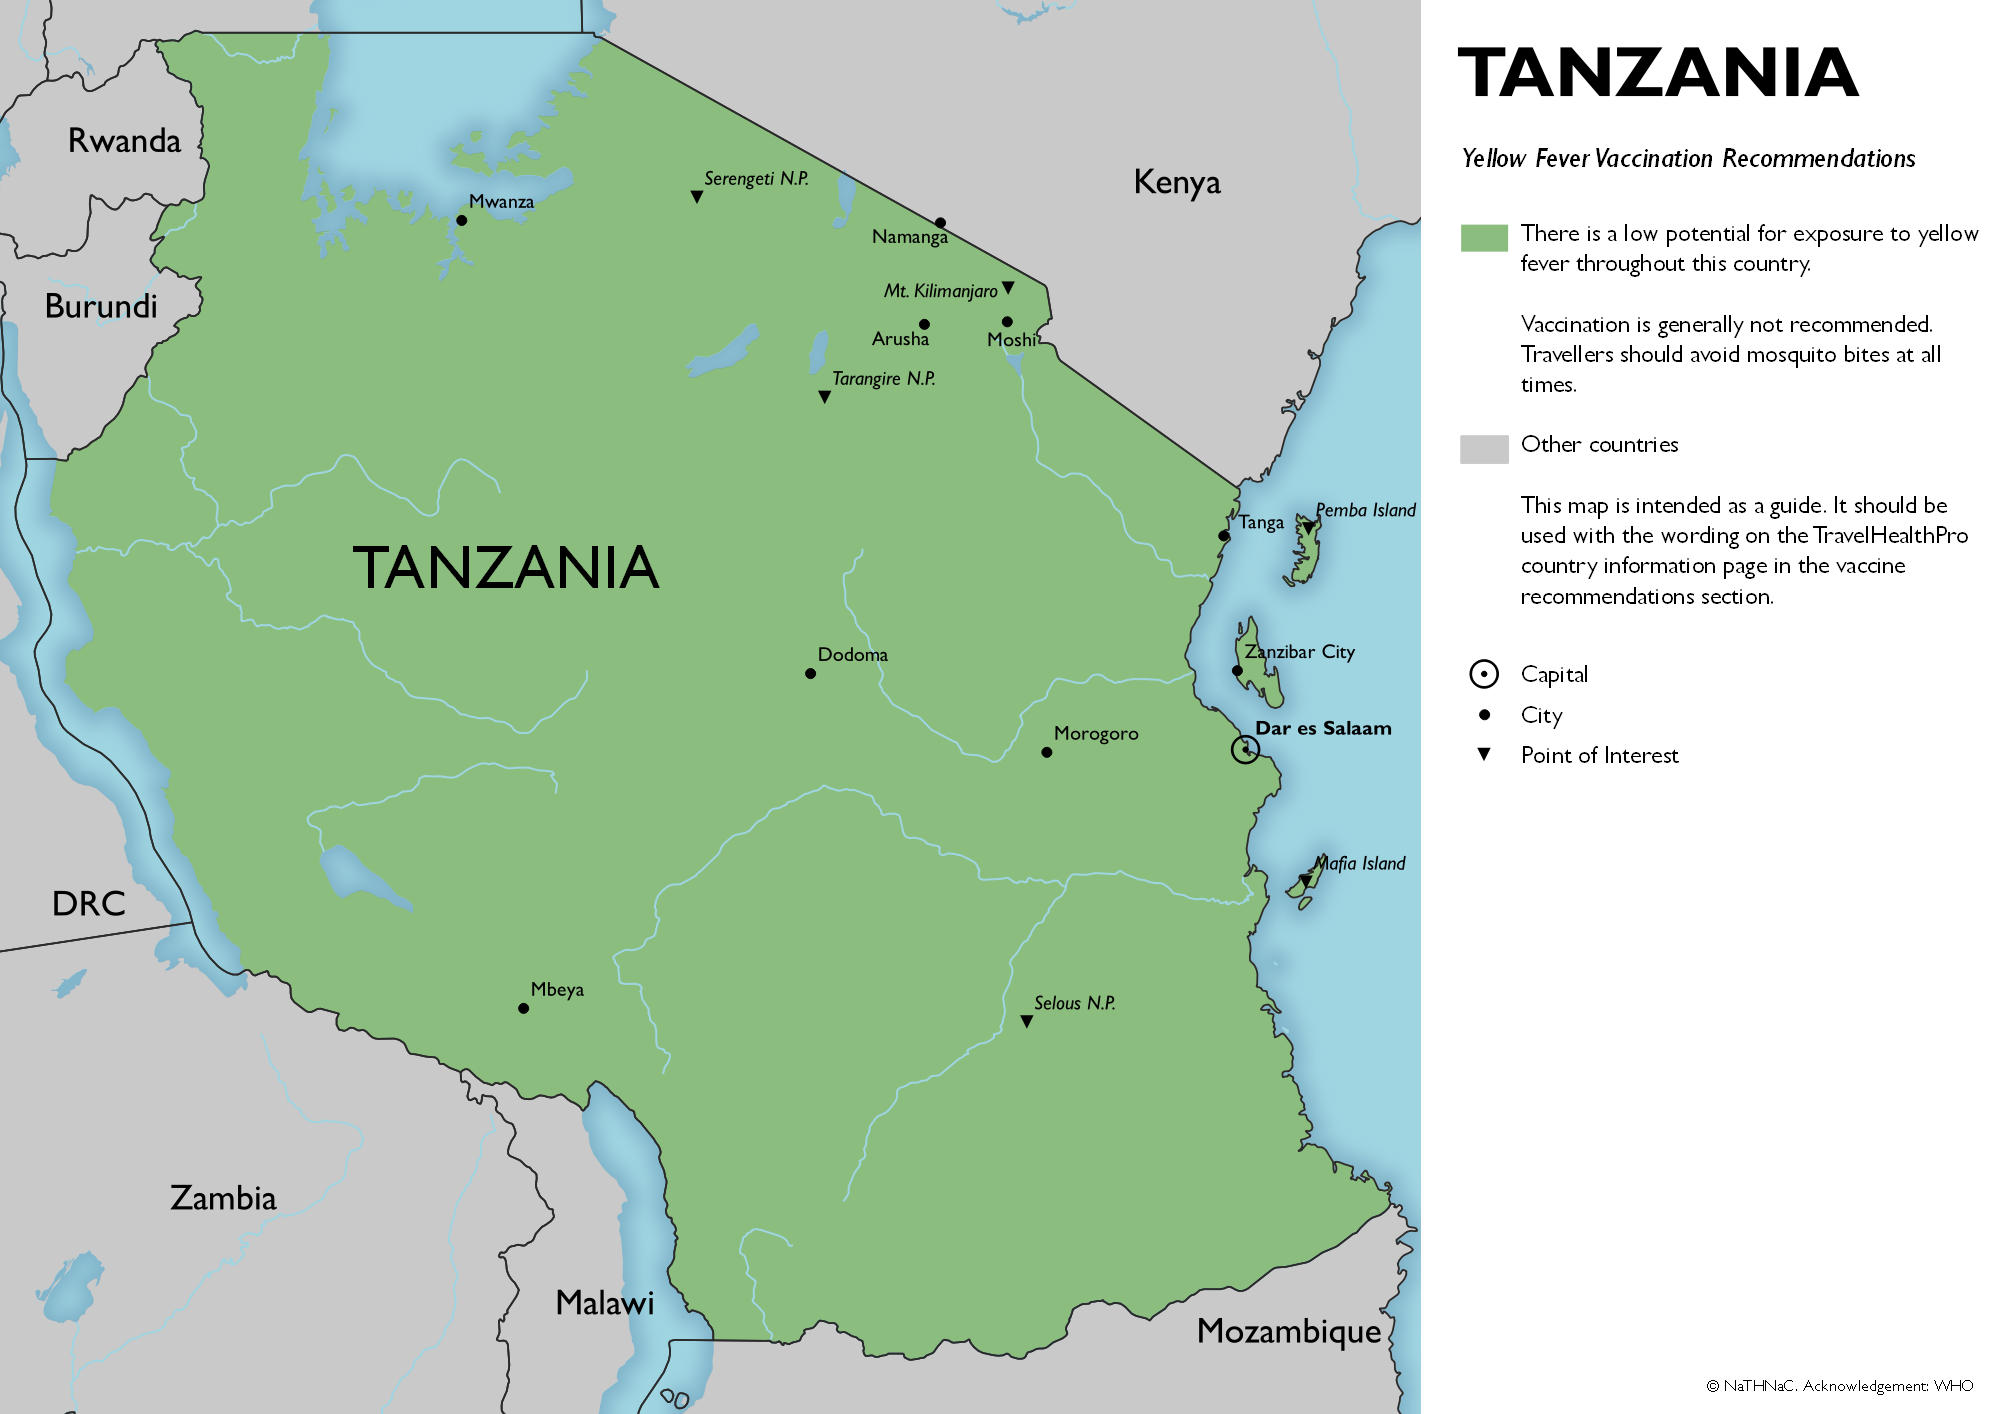 Yellow fever vaccine recommendation map for Tanzania